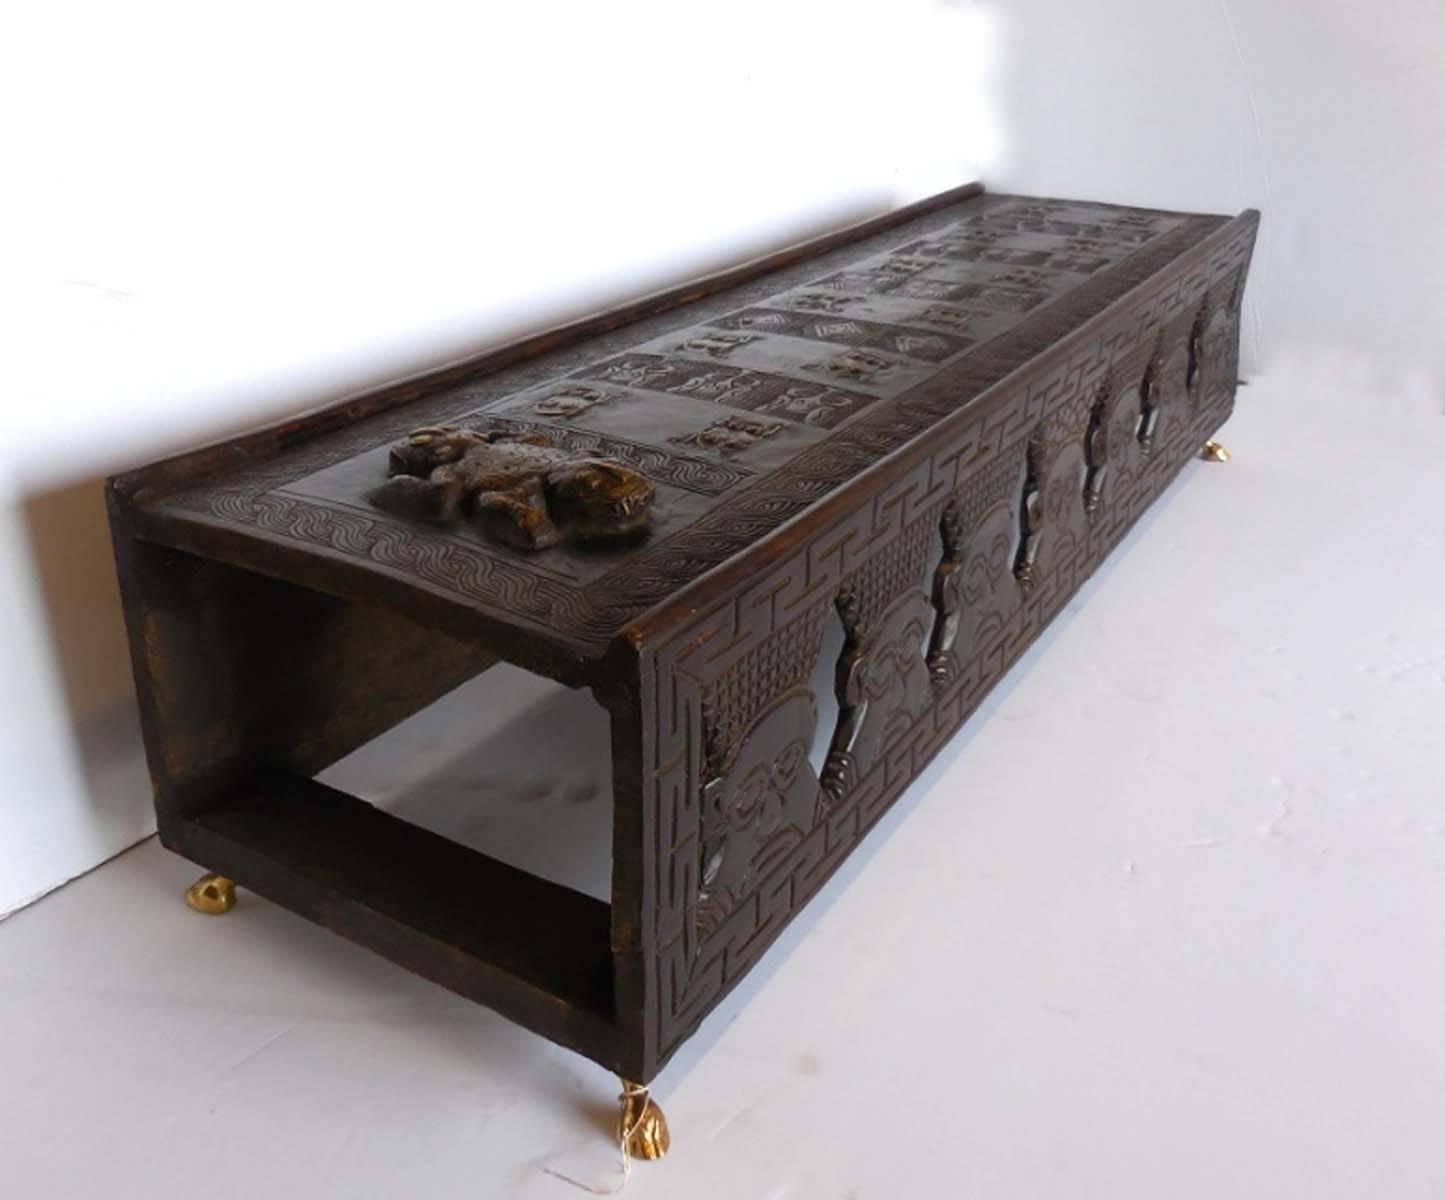 Cameroonian Hand-Carved African Bamileke Child's Bed, Bench or Coffee Table